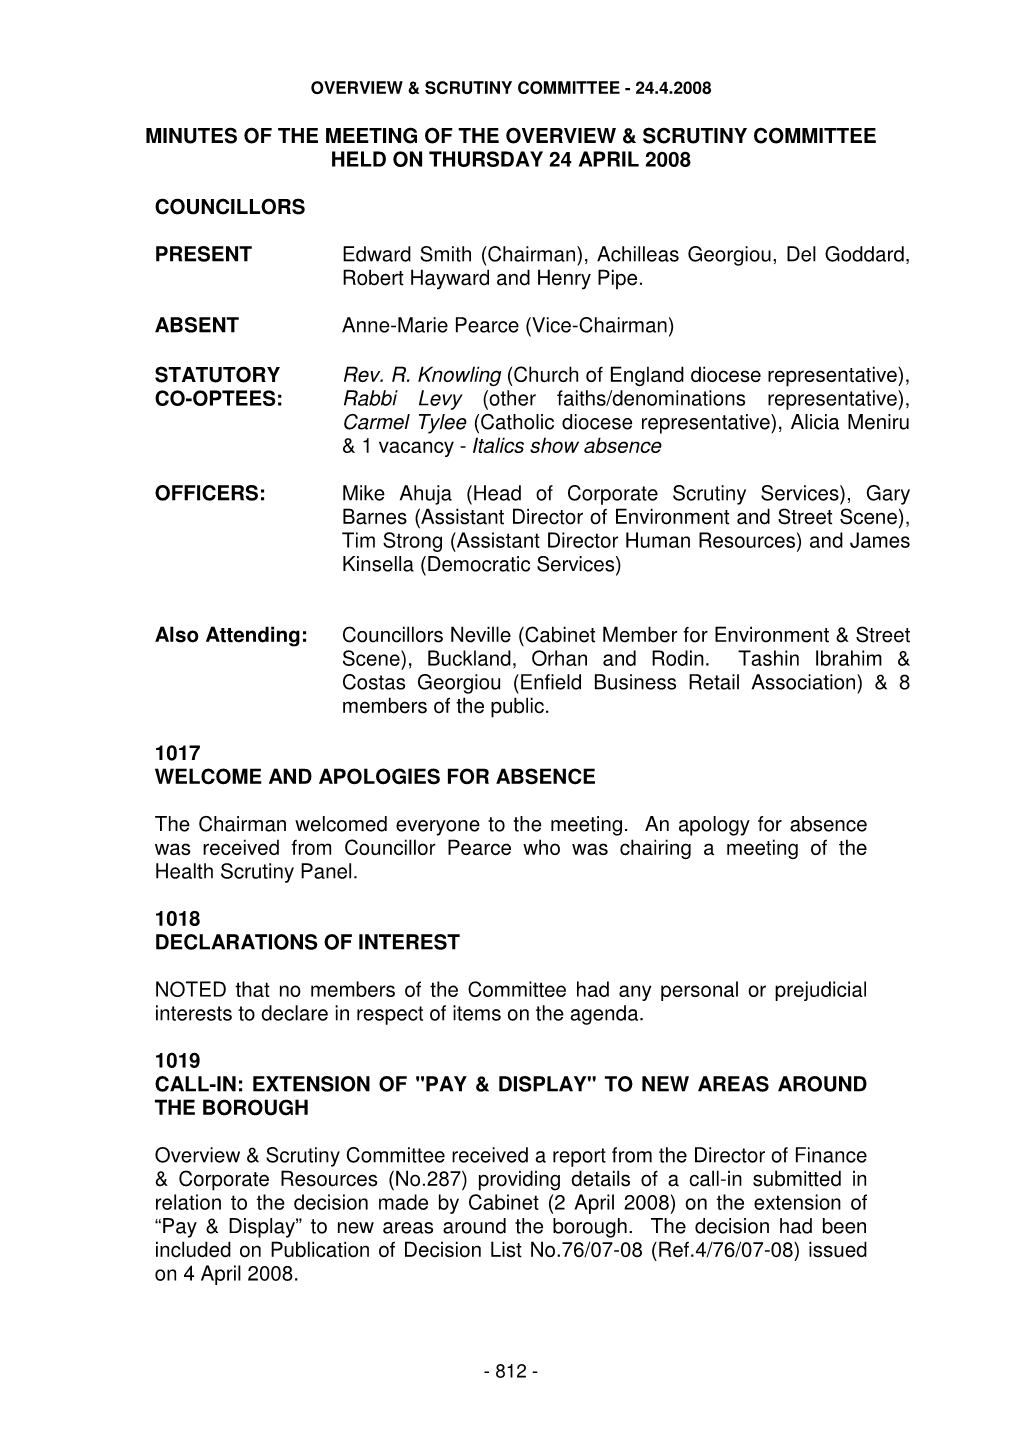 MINUTES of the MEETING of the OVERVIEW & SCRUTINY COMMITTEE HELD on THURSDAY 24 APRIL 2008 COUNCILLORS PRESENT Edward Smith